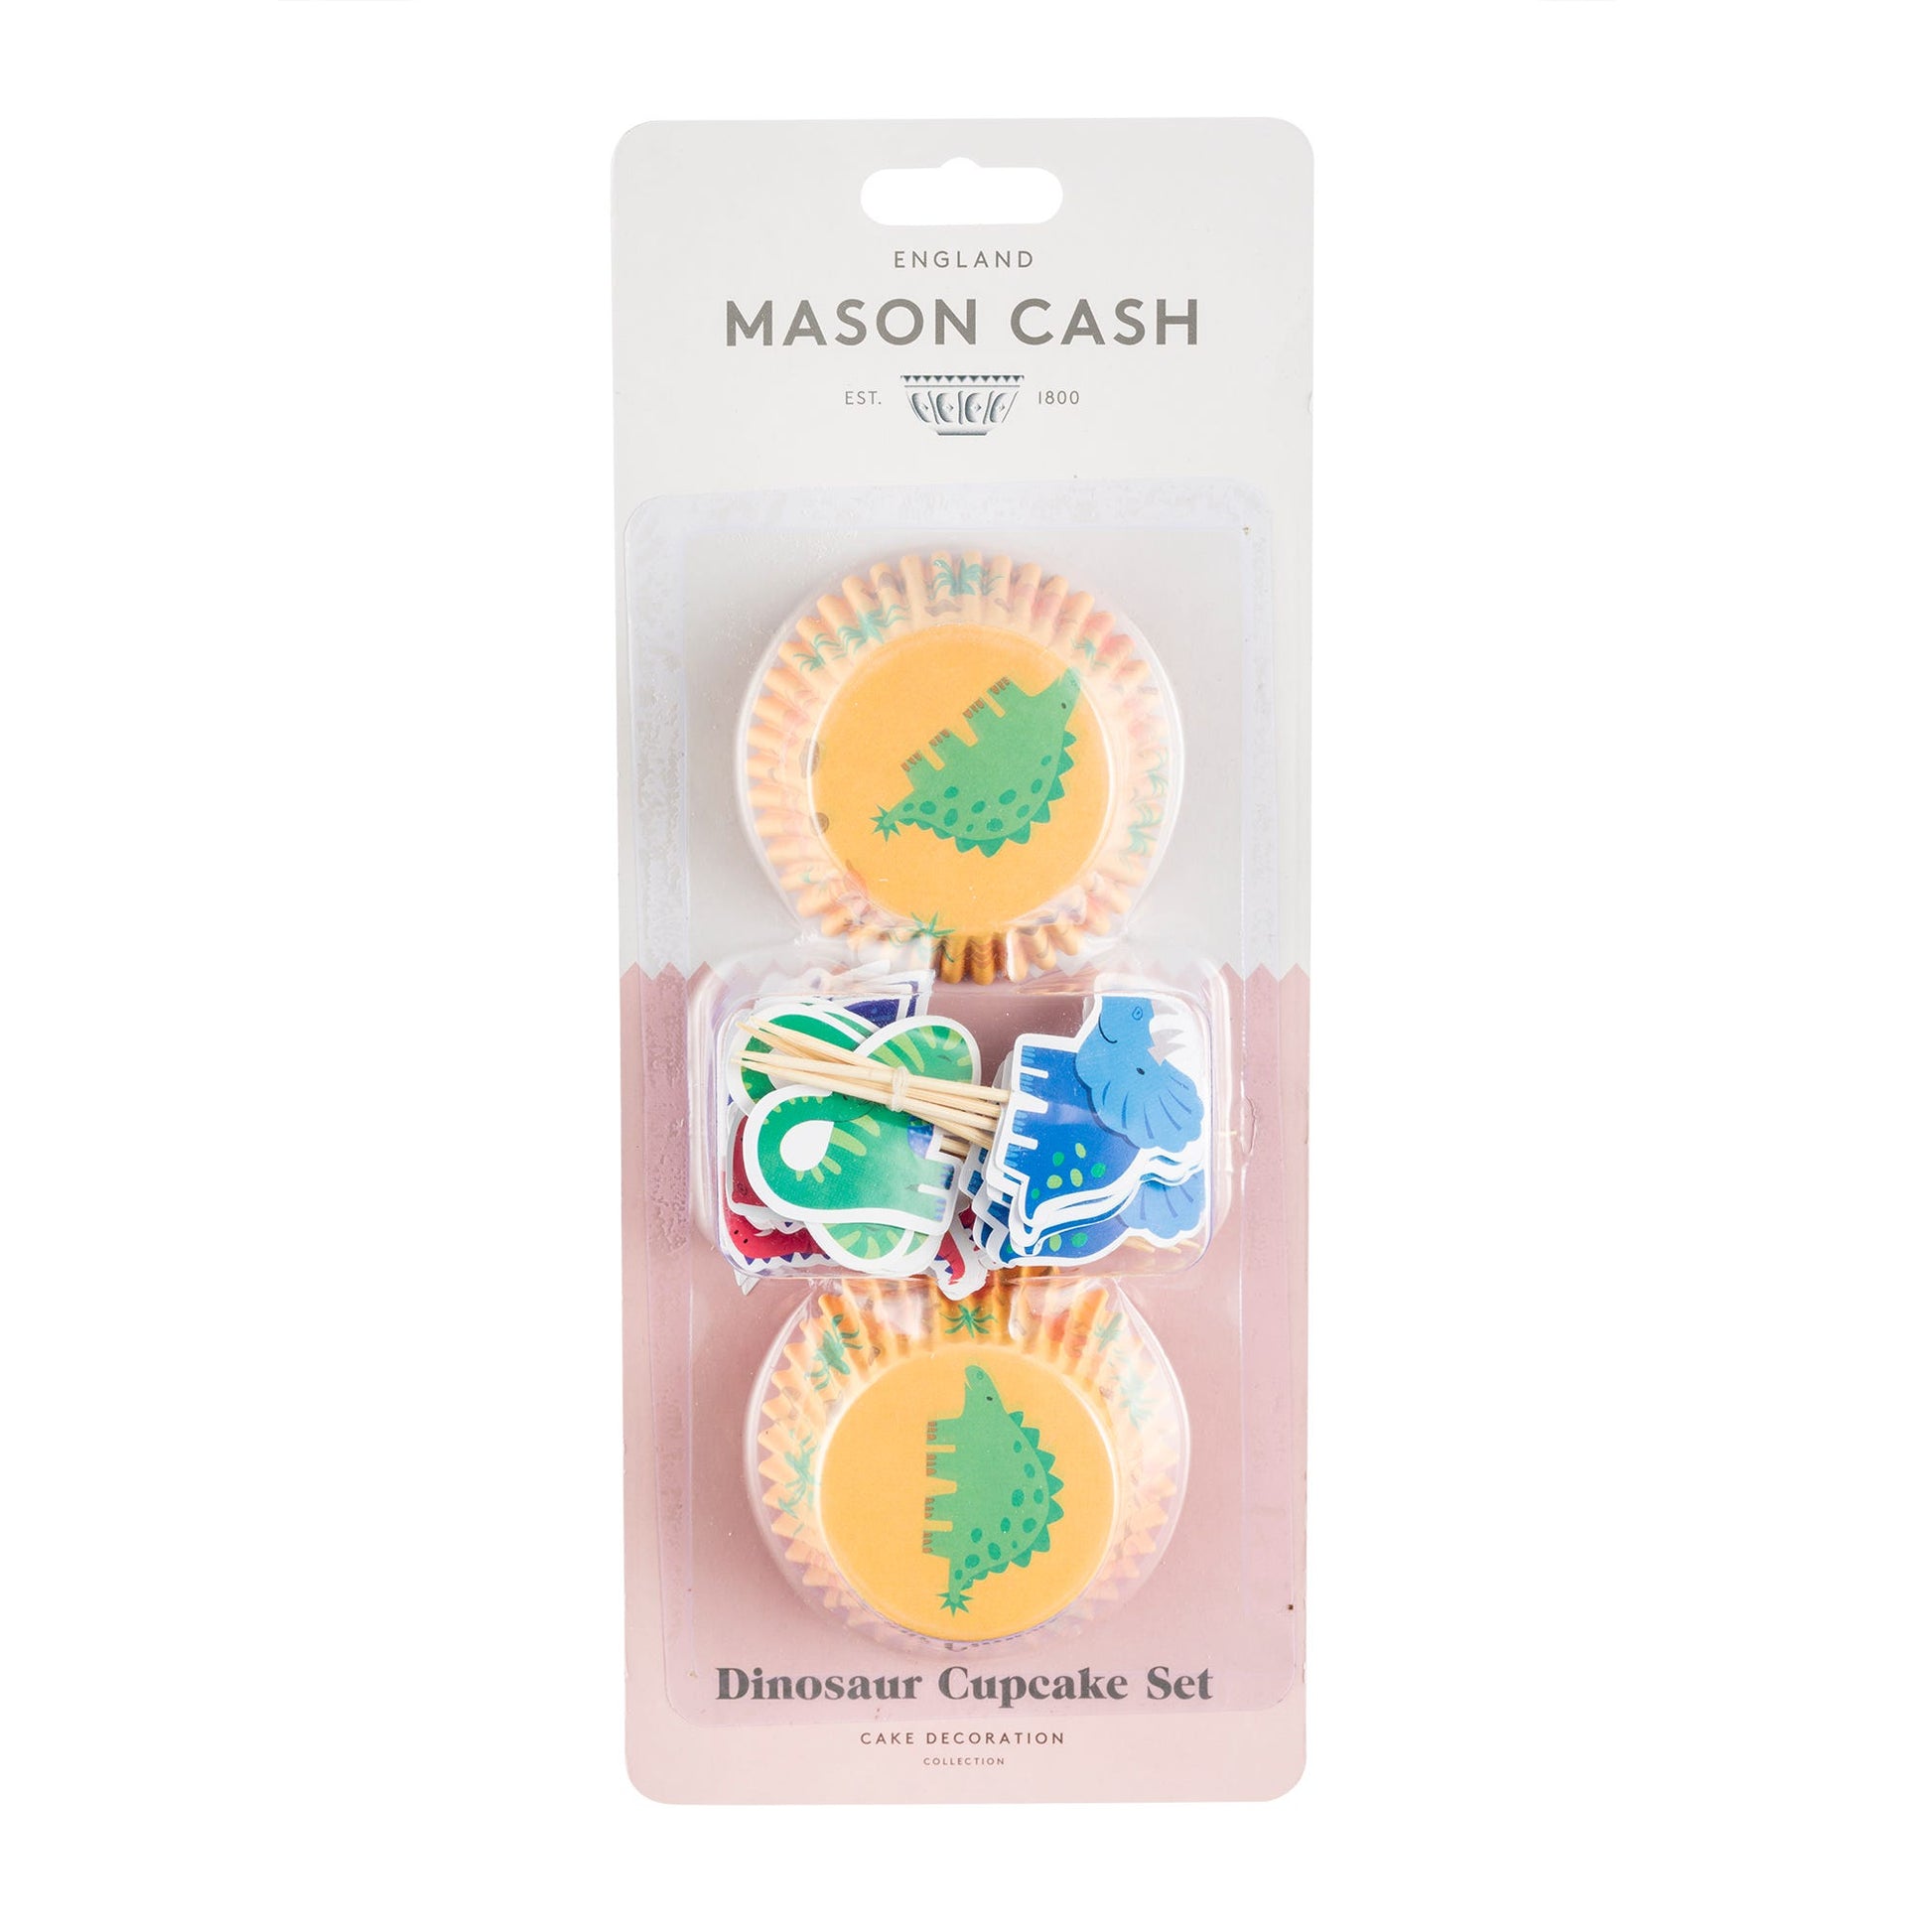 Mason Cash Dinosaur Set of 48 Cupcake Cases and Toppers